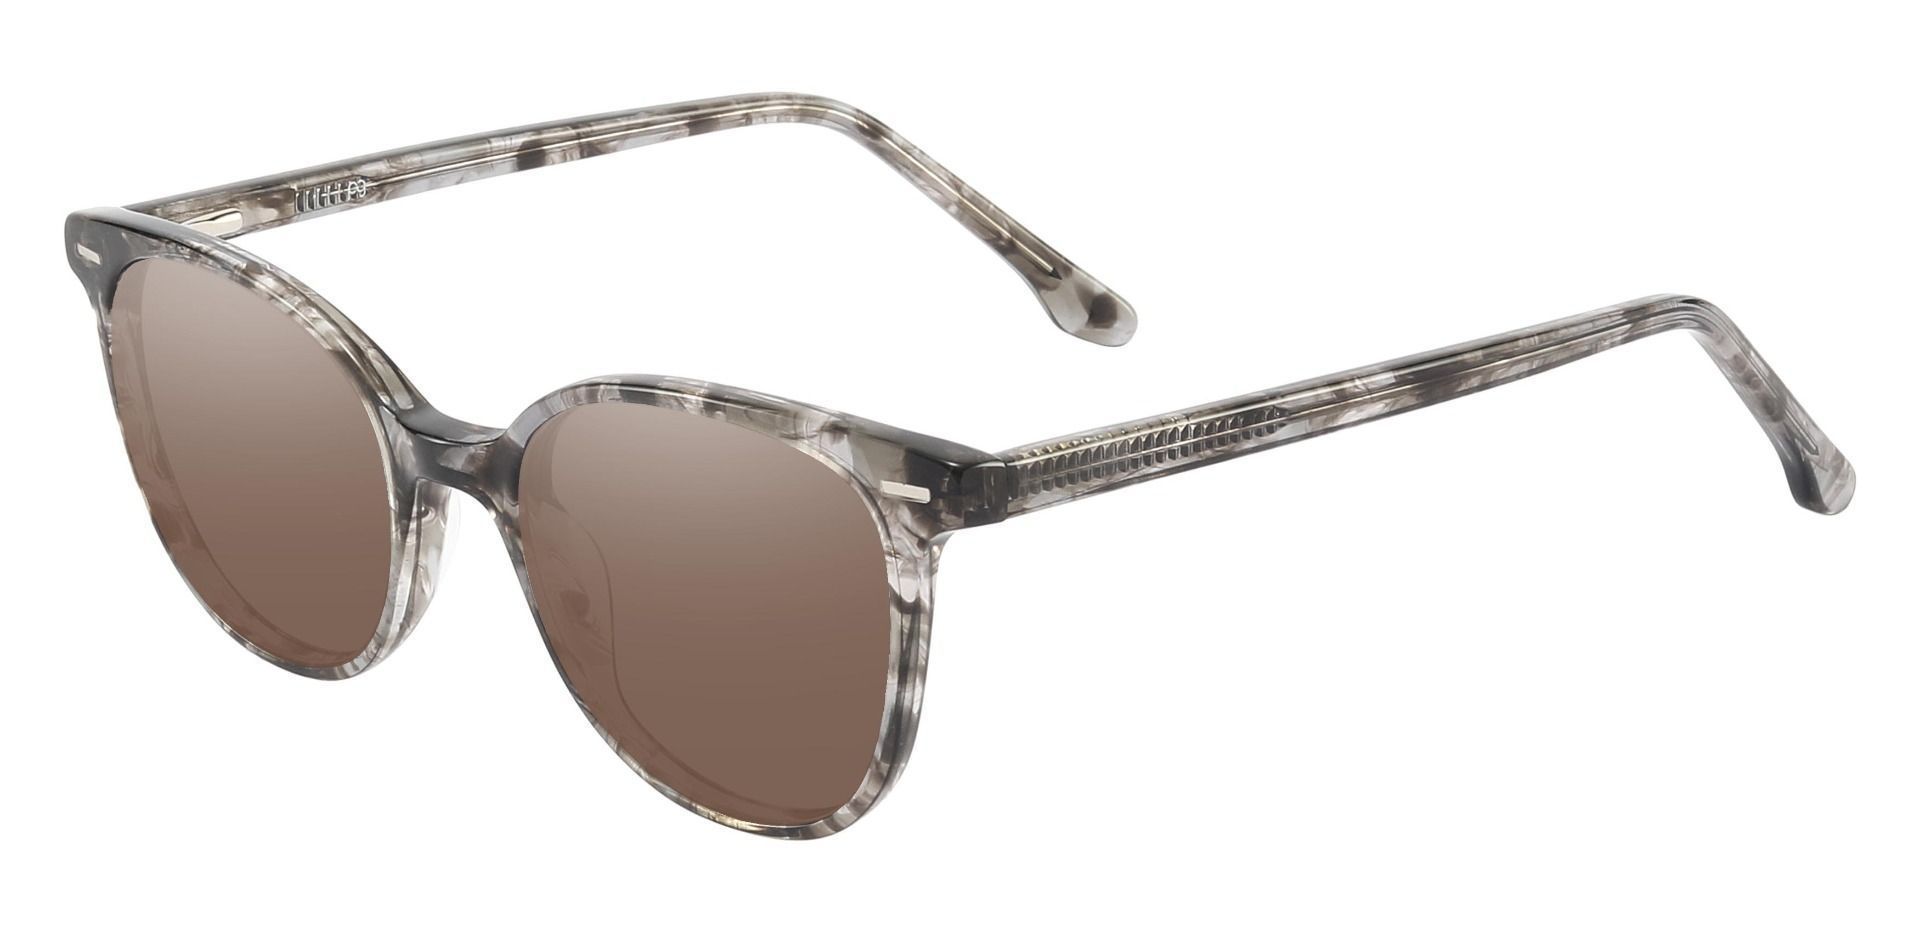 Chili Oval Non-Rx Sunglasses - Gray Frame With Brown Lenses